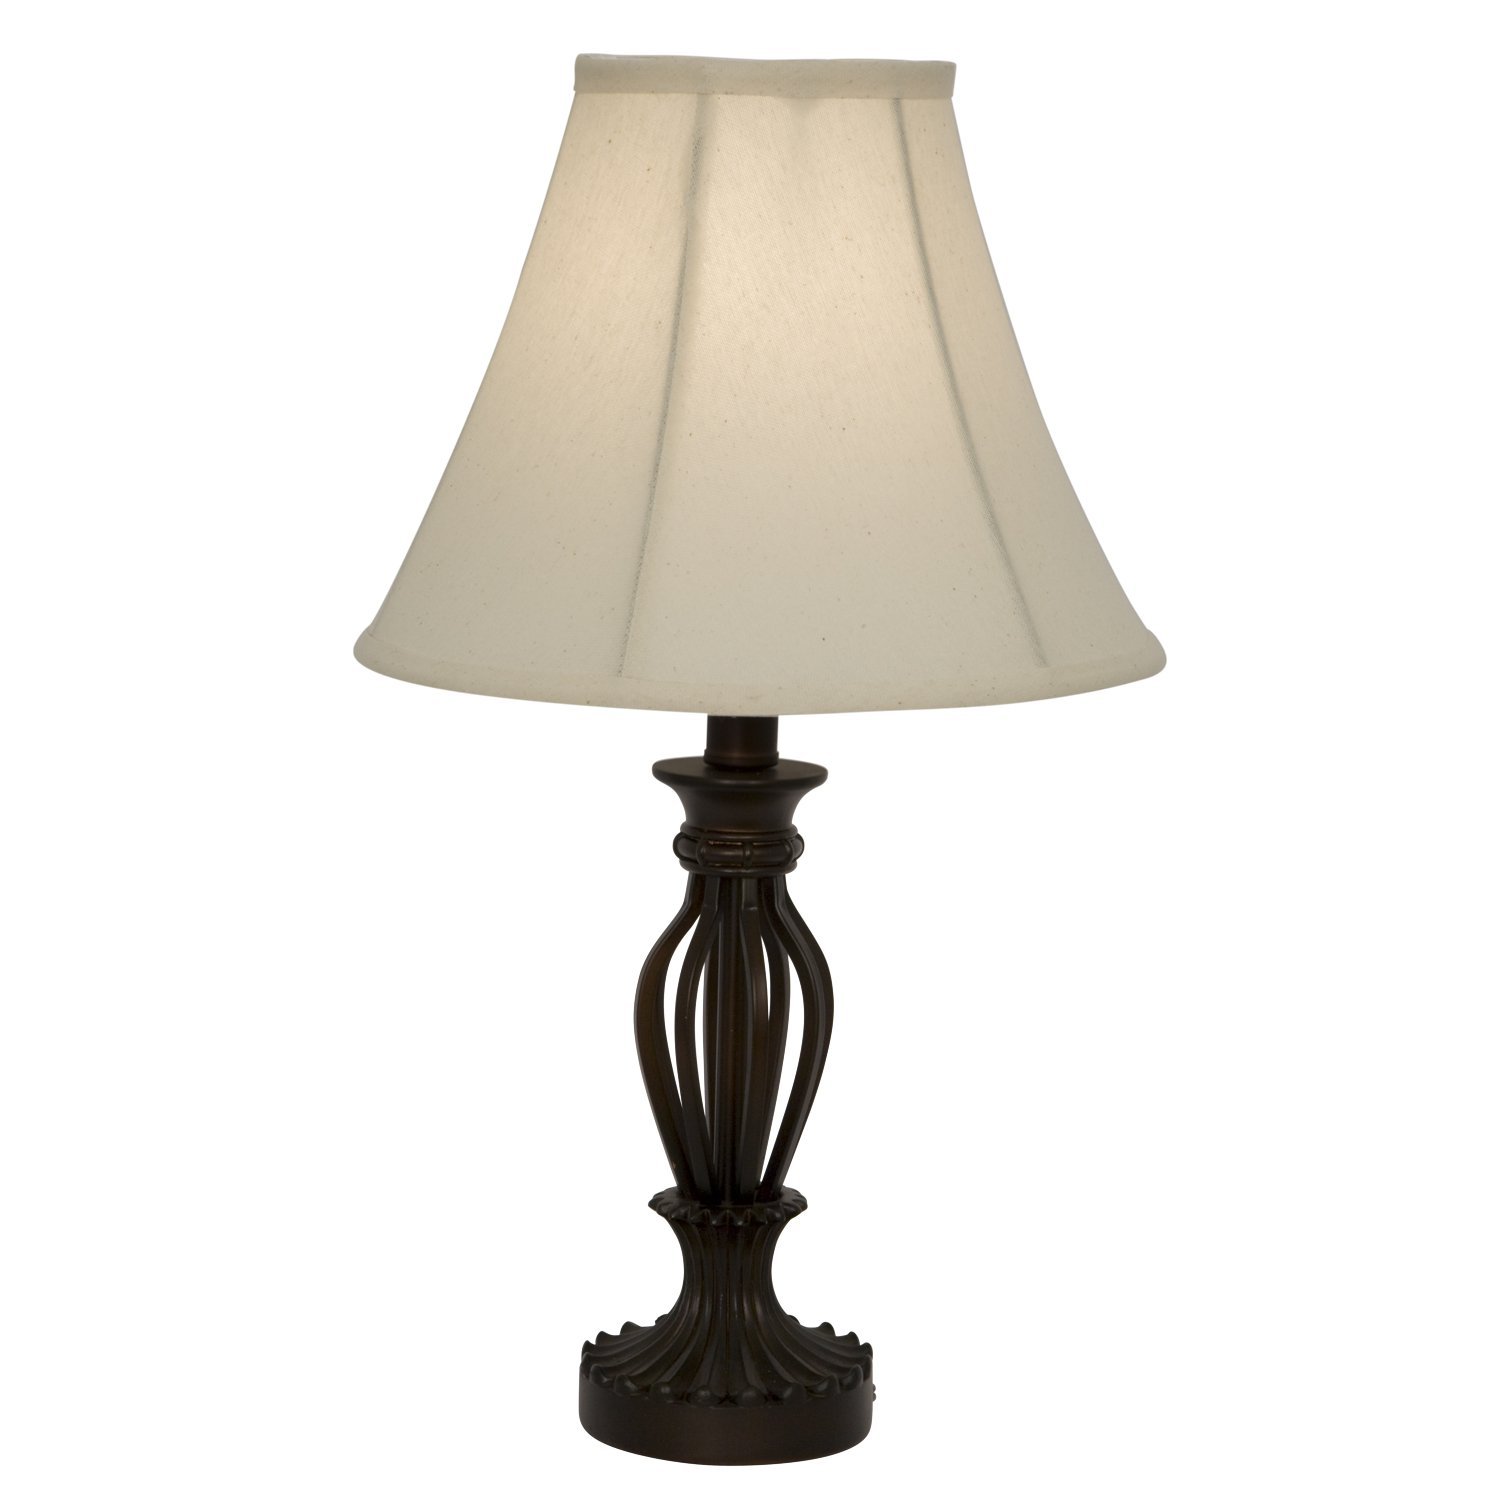 Light Accents, Table Lamp 18.5 Inches Height, Traditional Iron ...